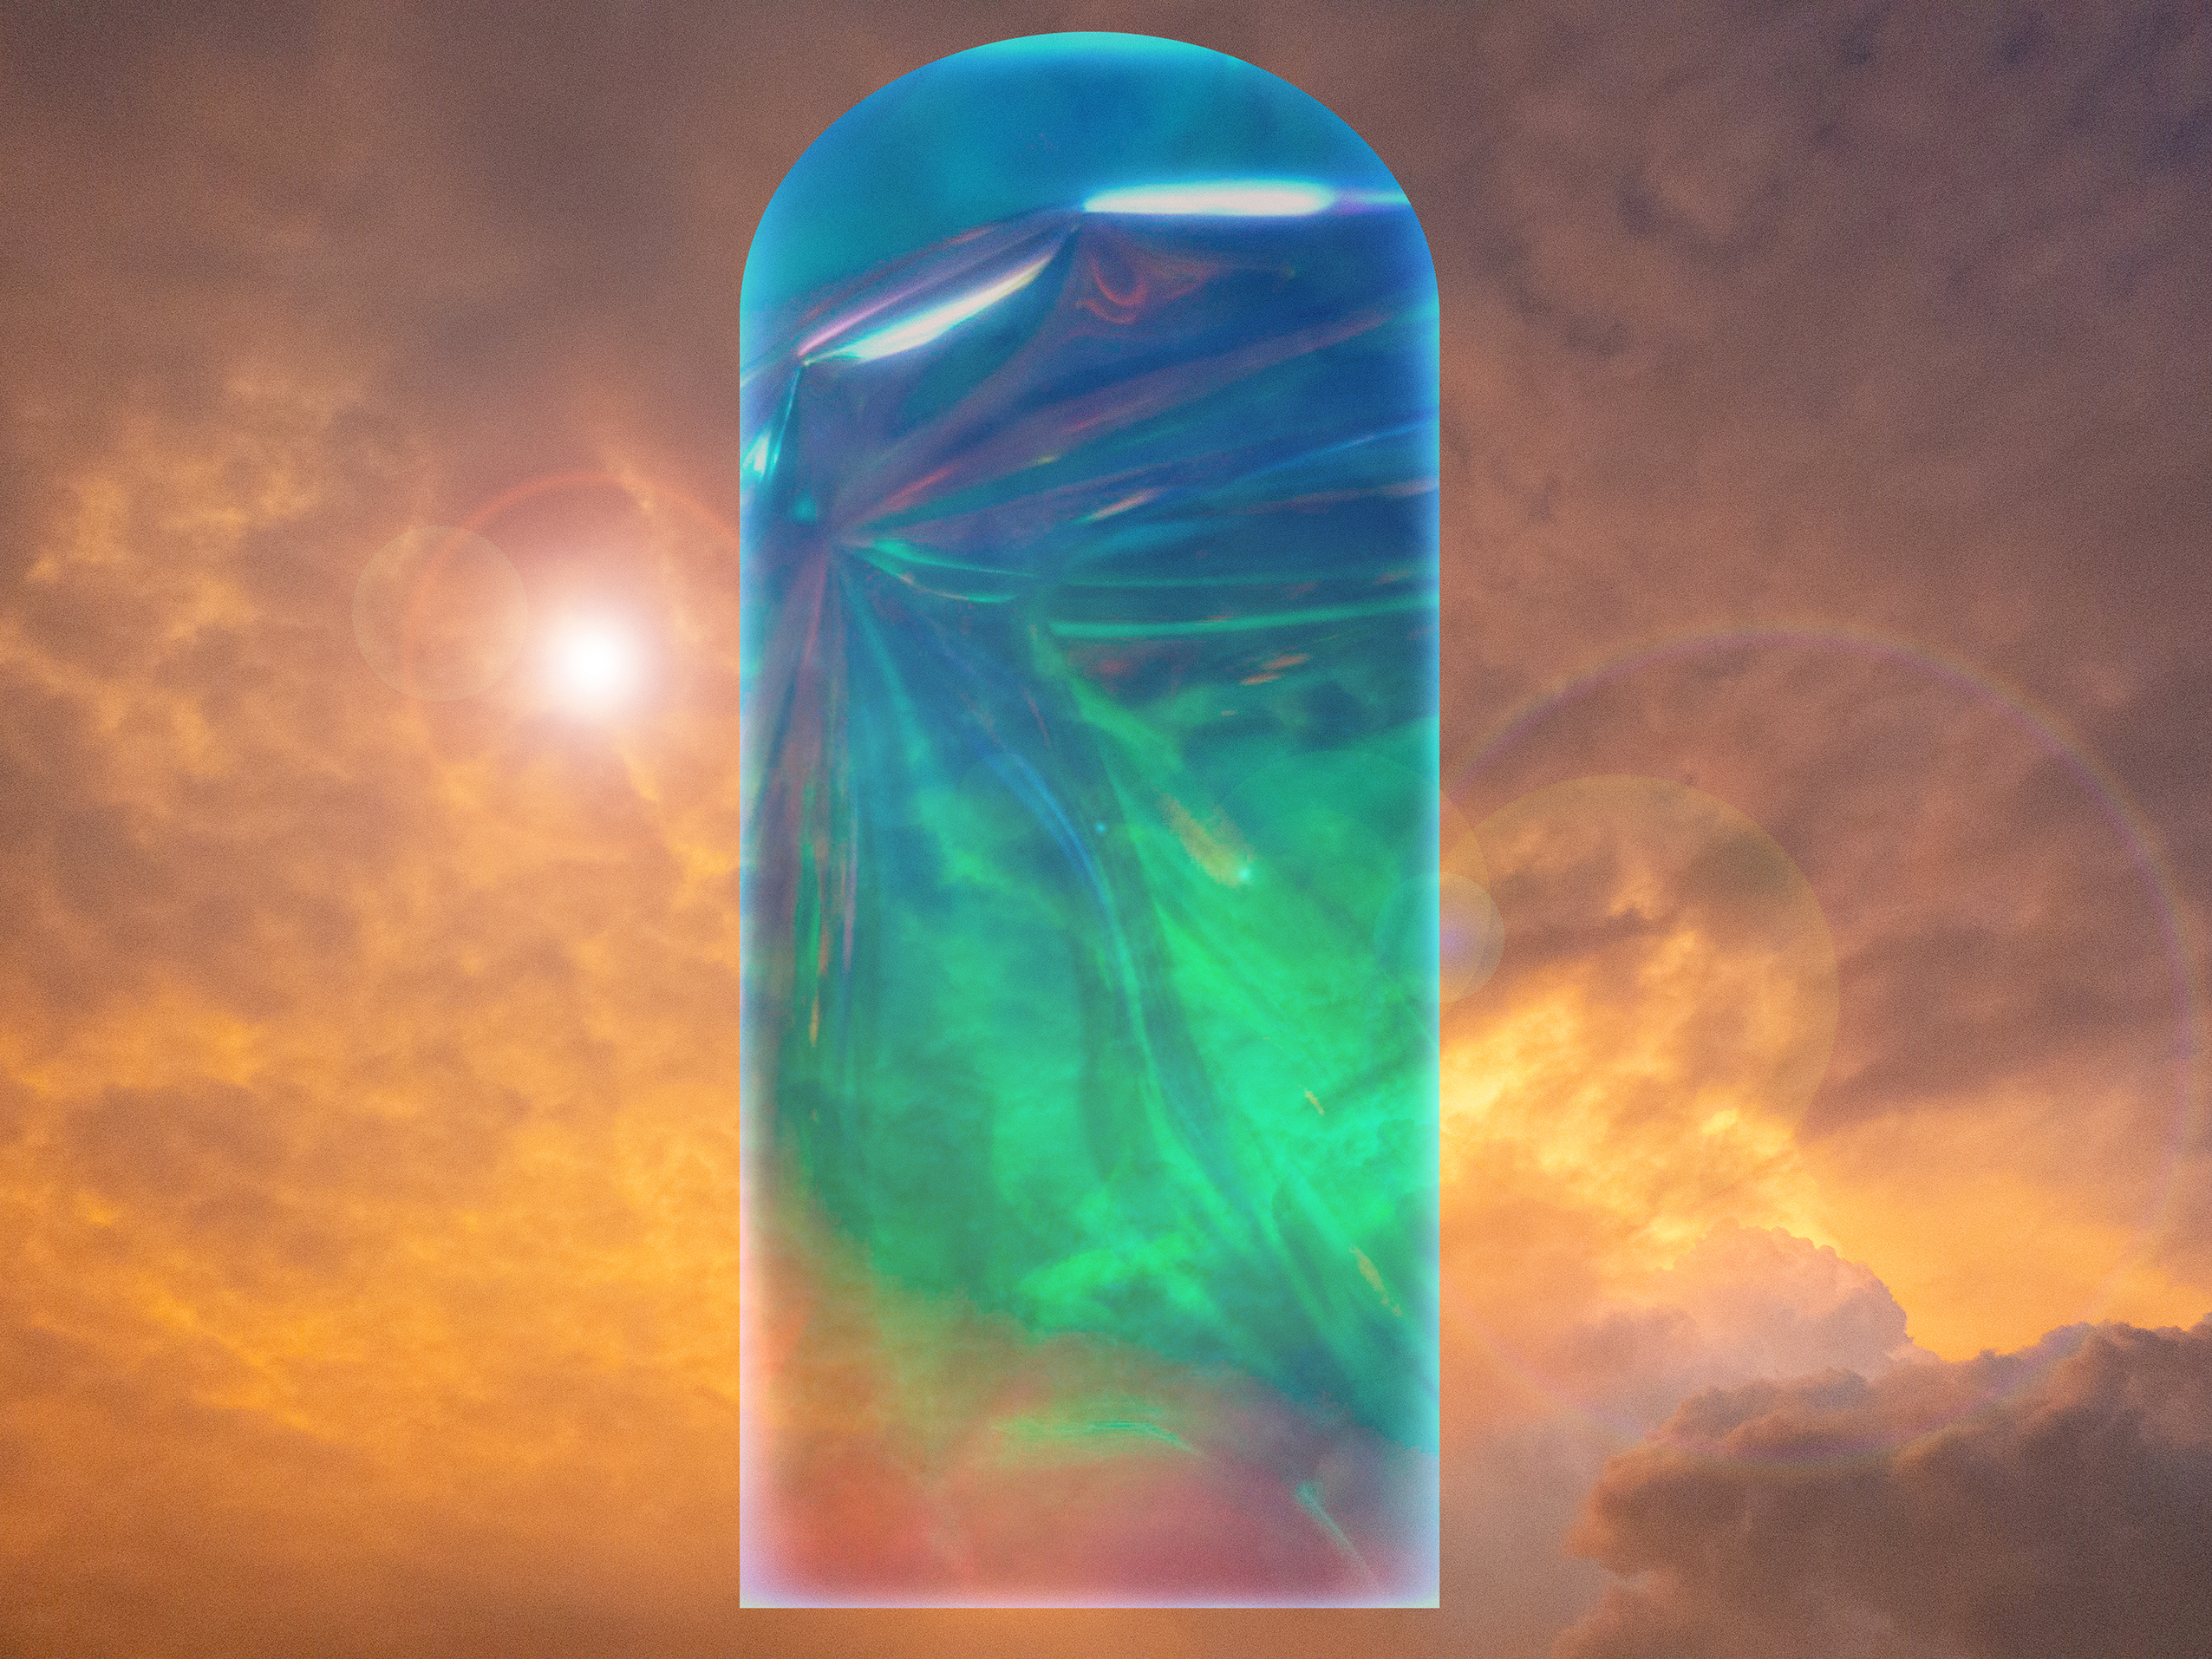 Background image of orange and grey clouds during a stormy sunset overlaid with lens flares. Floating in the foreground is a reflective, textured blue and turquoise elongated arch.